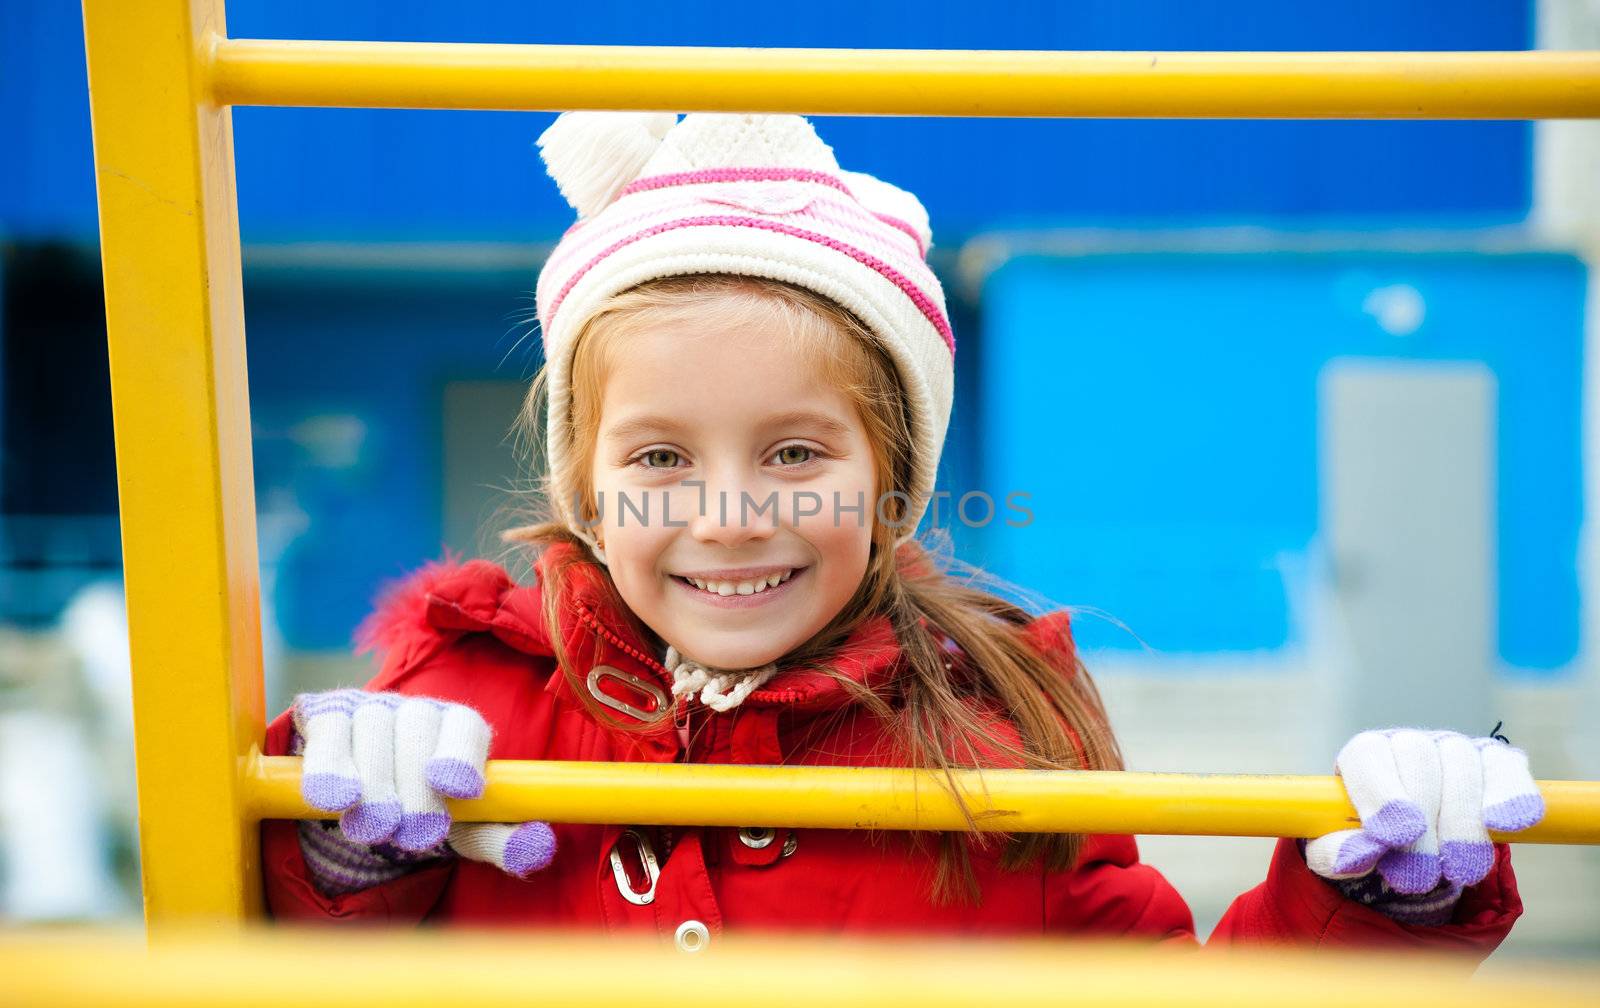 Cute smiling girl on outdoor playground